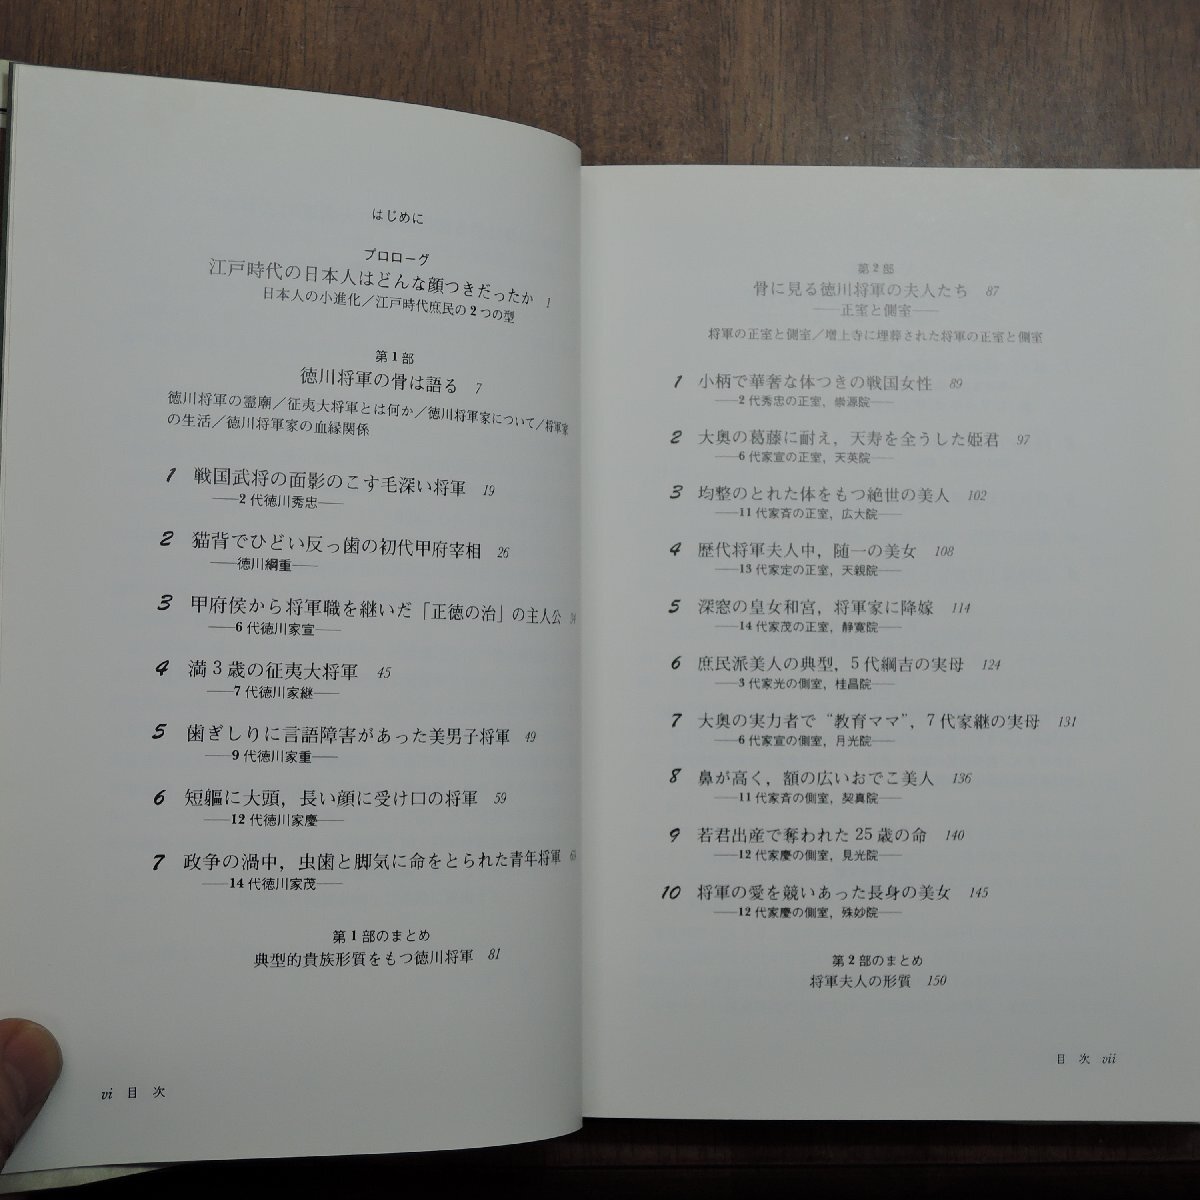 *. is language . virtue river . army * large name house. person .. Suzuki furthermore work Tokyo university publish . regular price 3800 jpy 1985 year the first version 